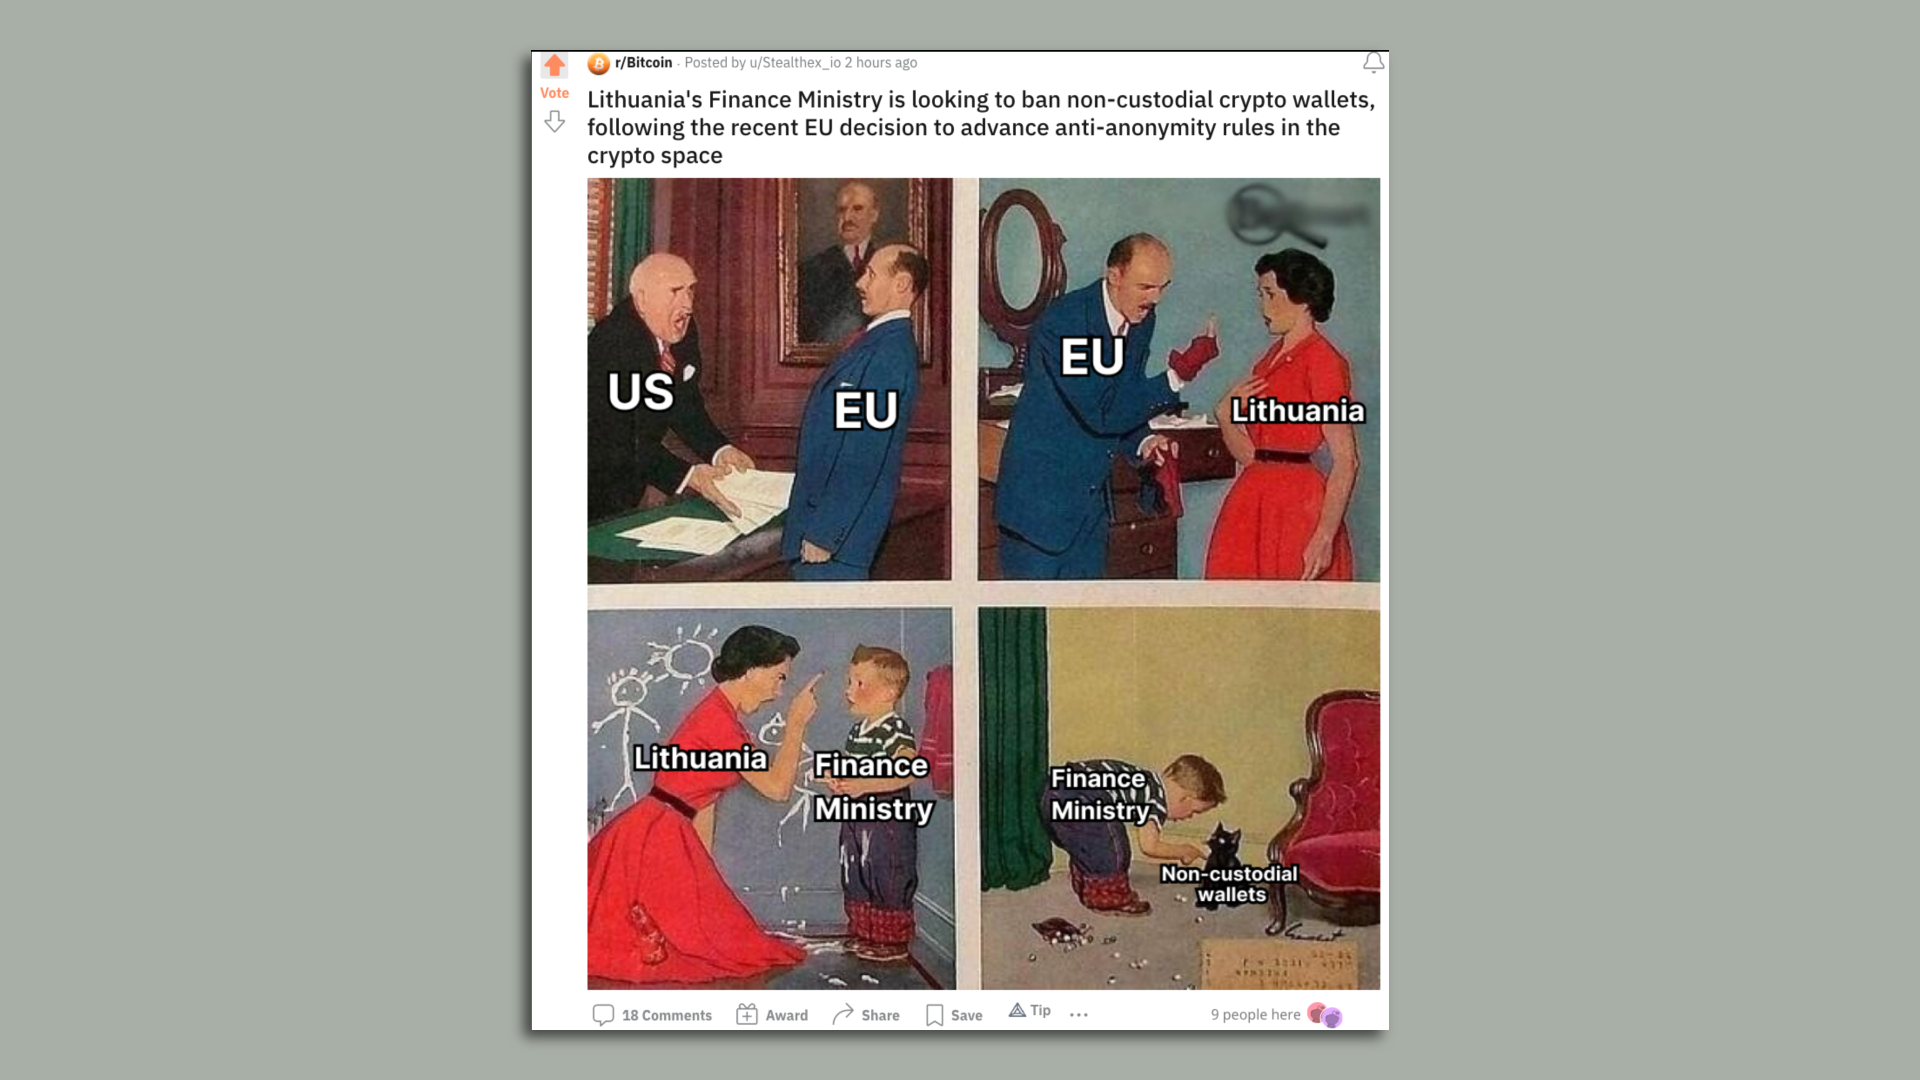 An internet meme about the US yelling at the EU, the EU yelling at Lithuania, Lithuania yelling at its finance ministry and the finance ministry yelling at bitcoin software wallet users. 